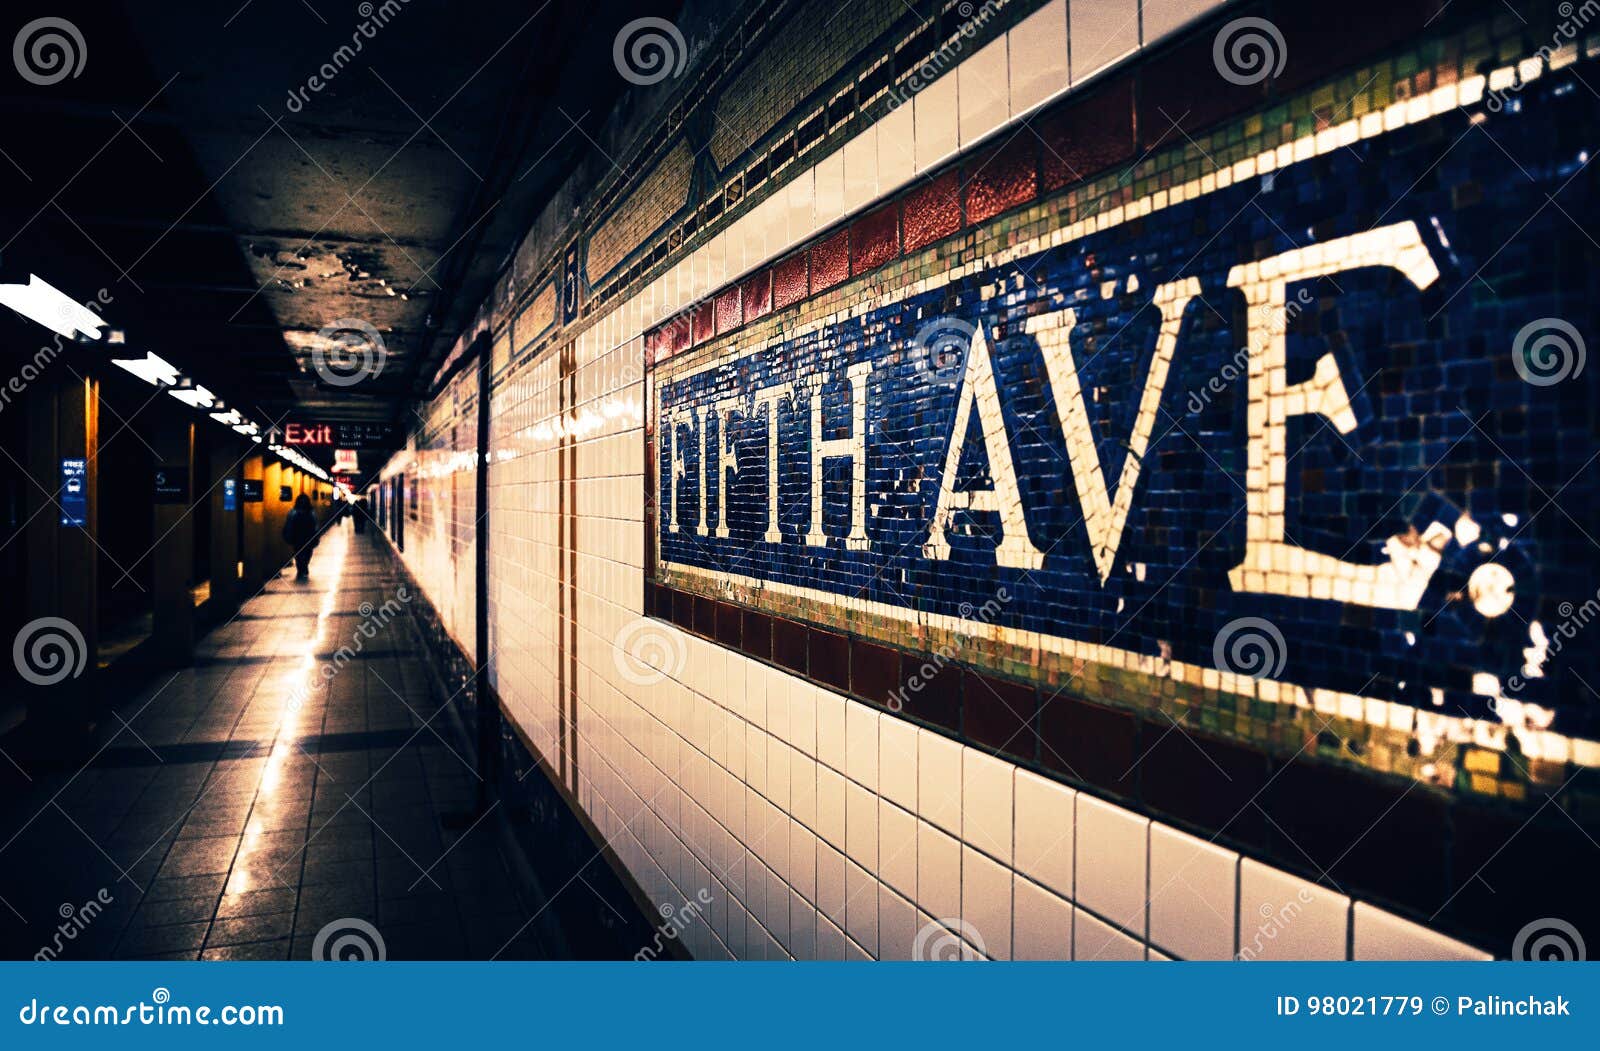 fifth avenue subway station